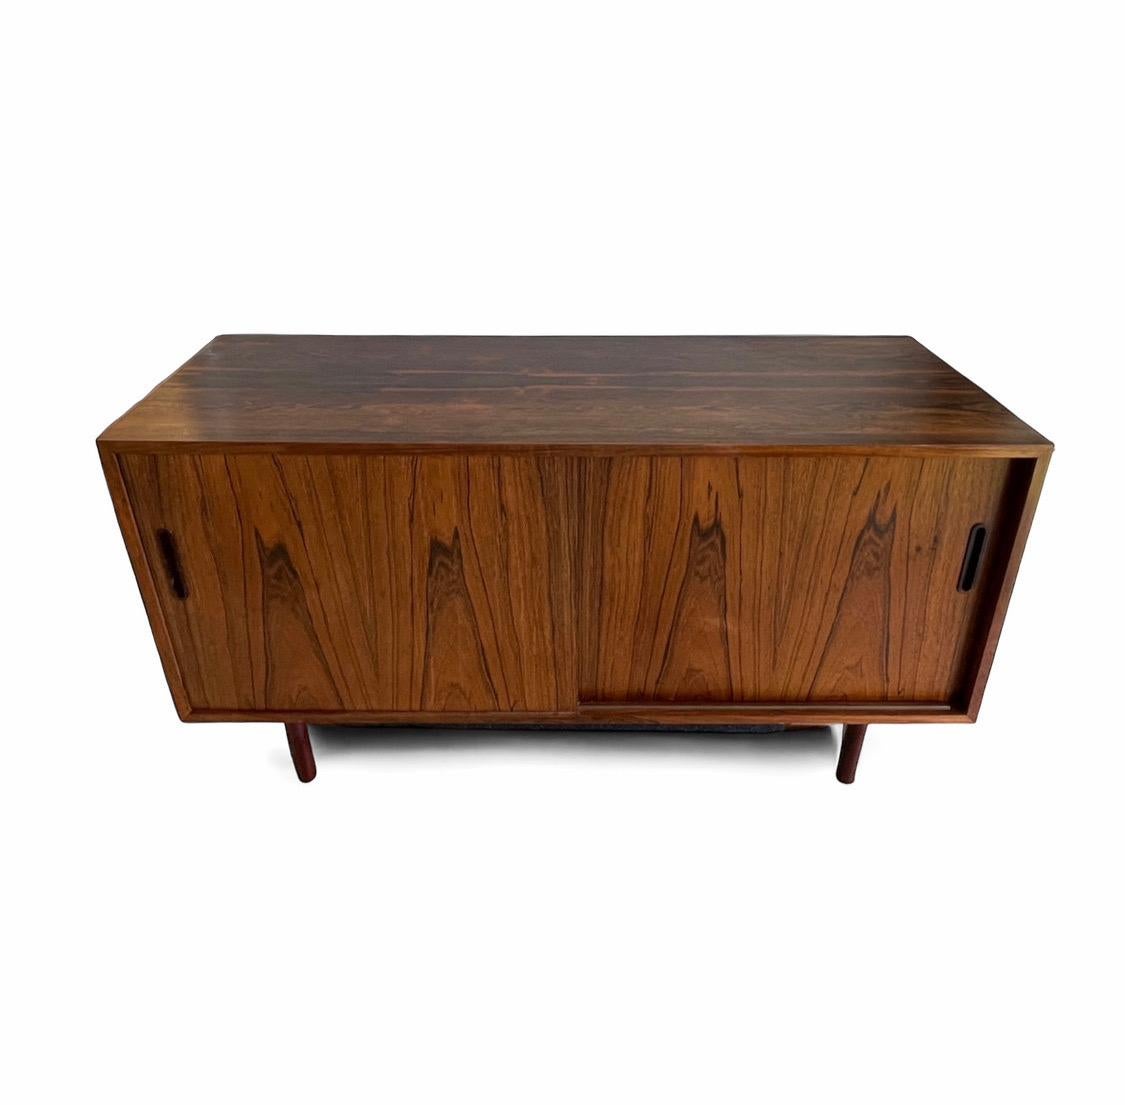 20th Century Danish Credenza by Poul Hundavad from Hundevad & Co For Sale